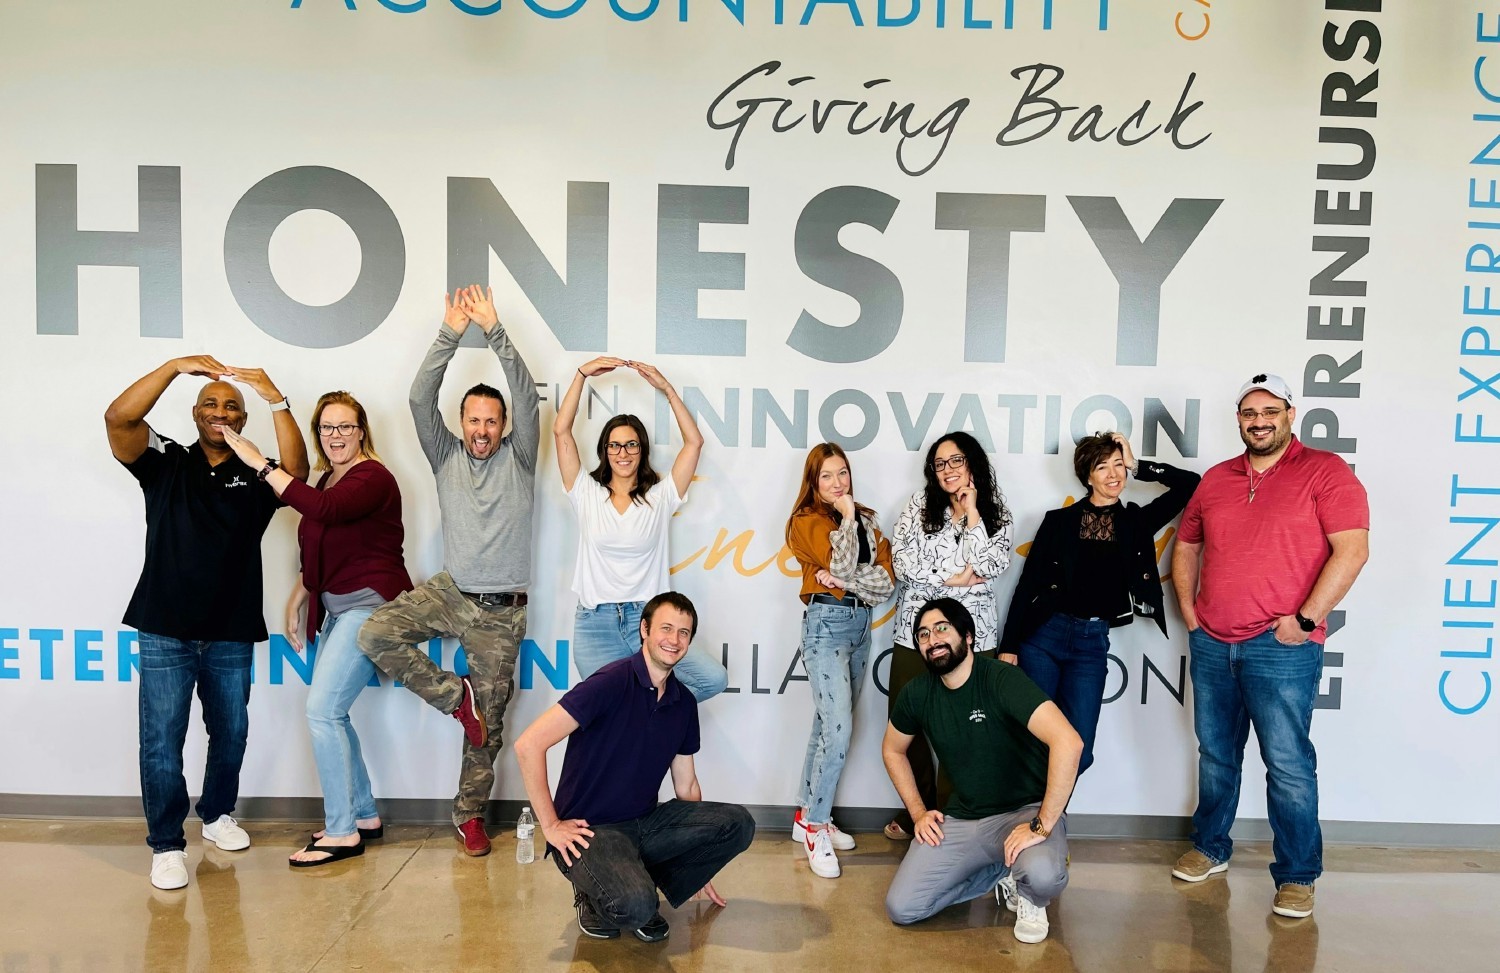 Marketing Team in front of the Values Wall in Corporate Headquarters